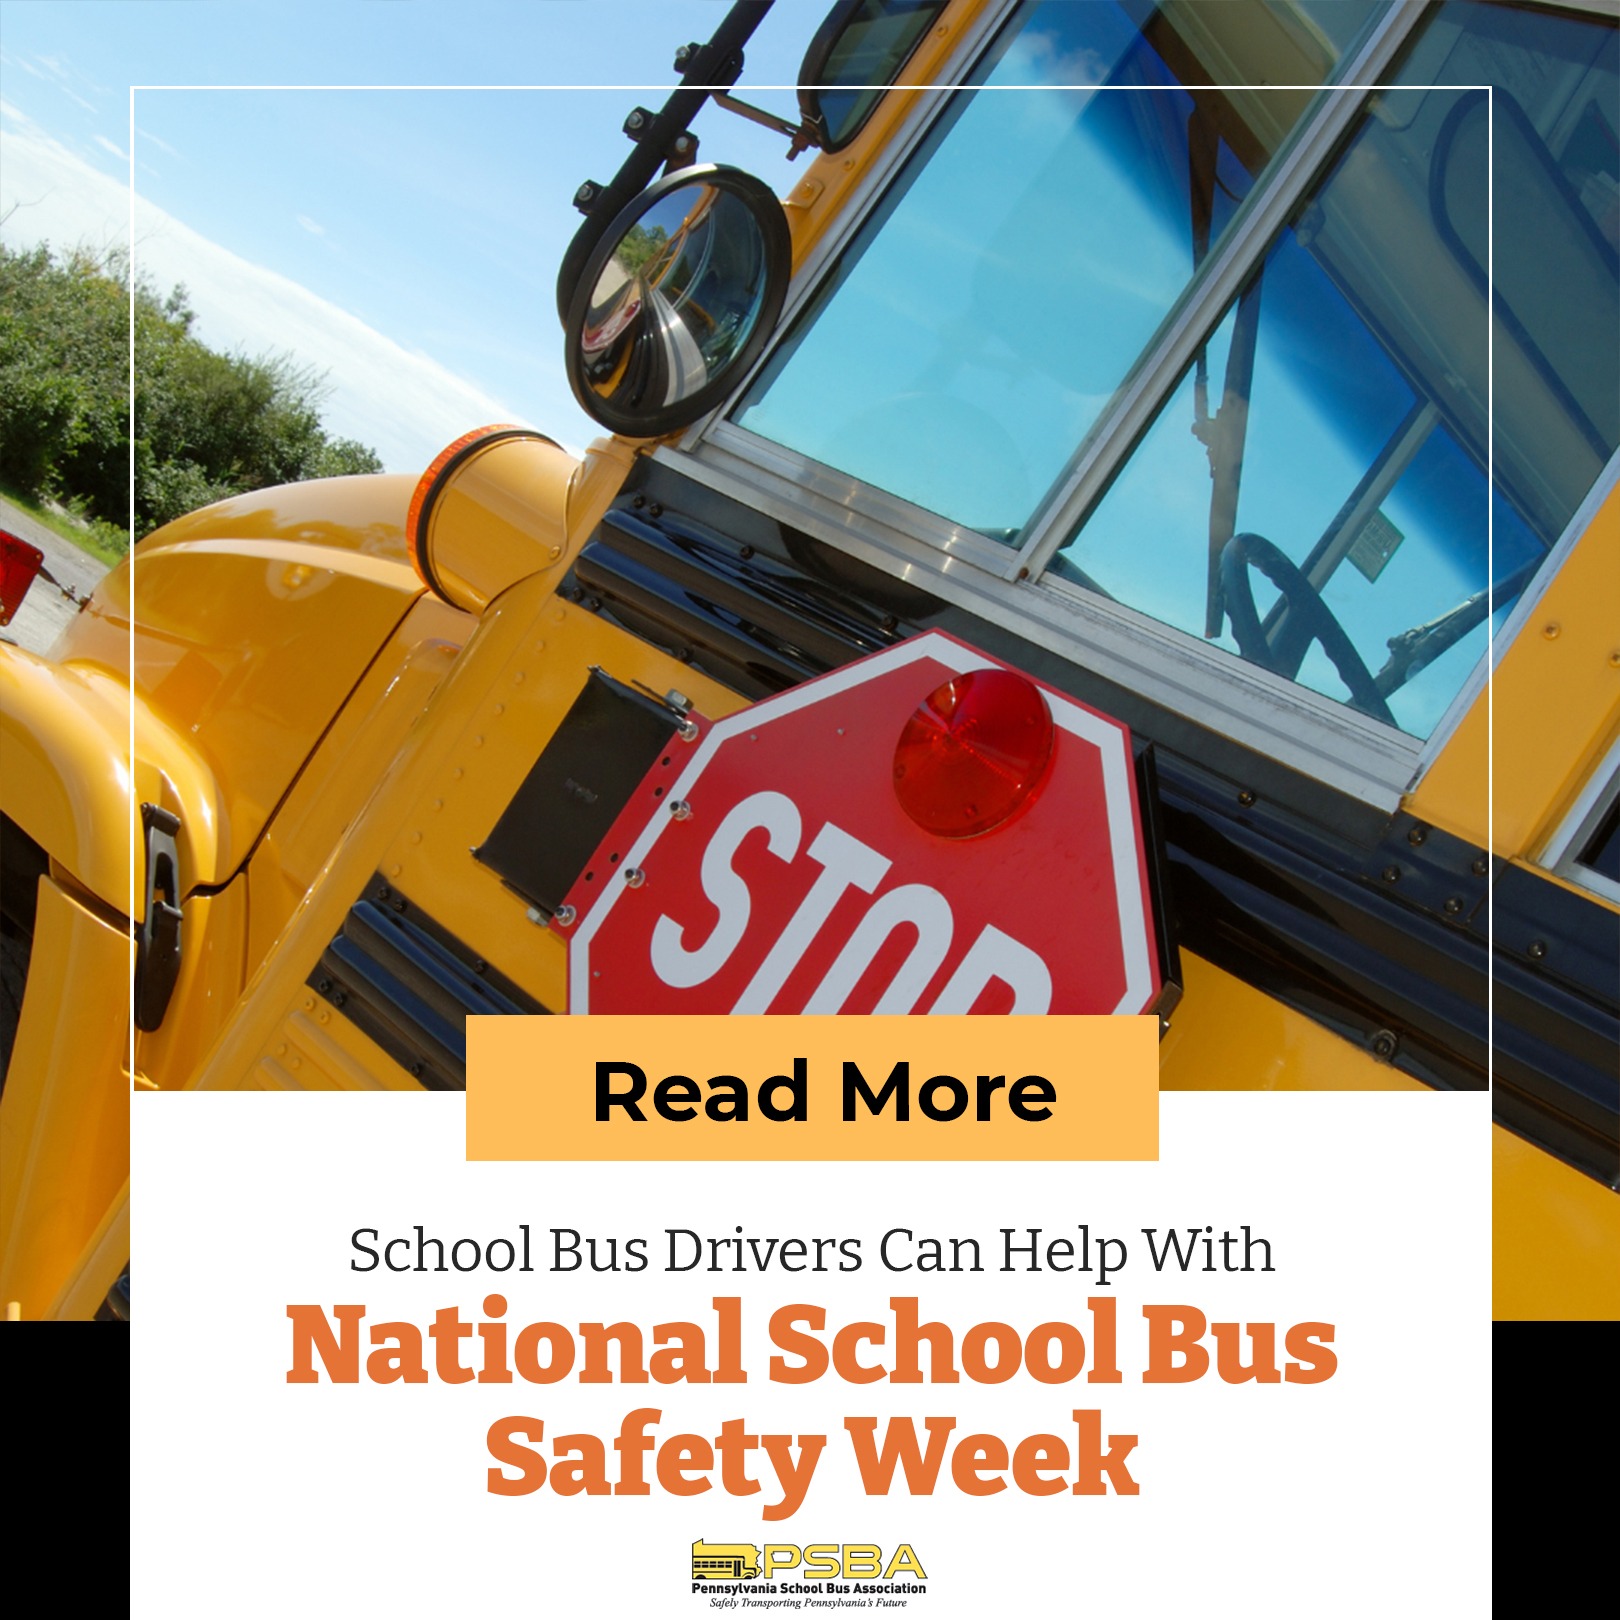 Bus Drivers Can Help with National School Bus Safety Week